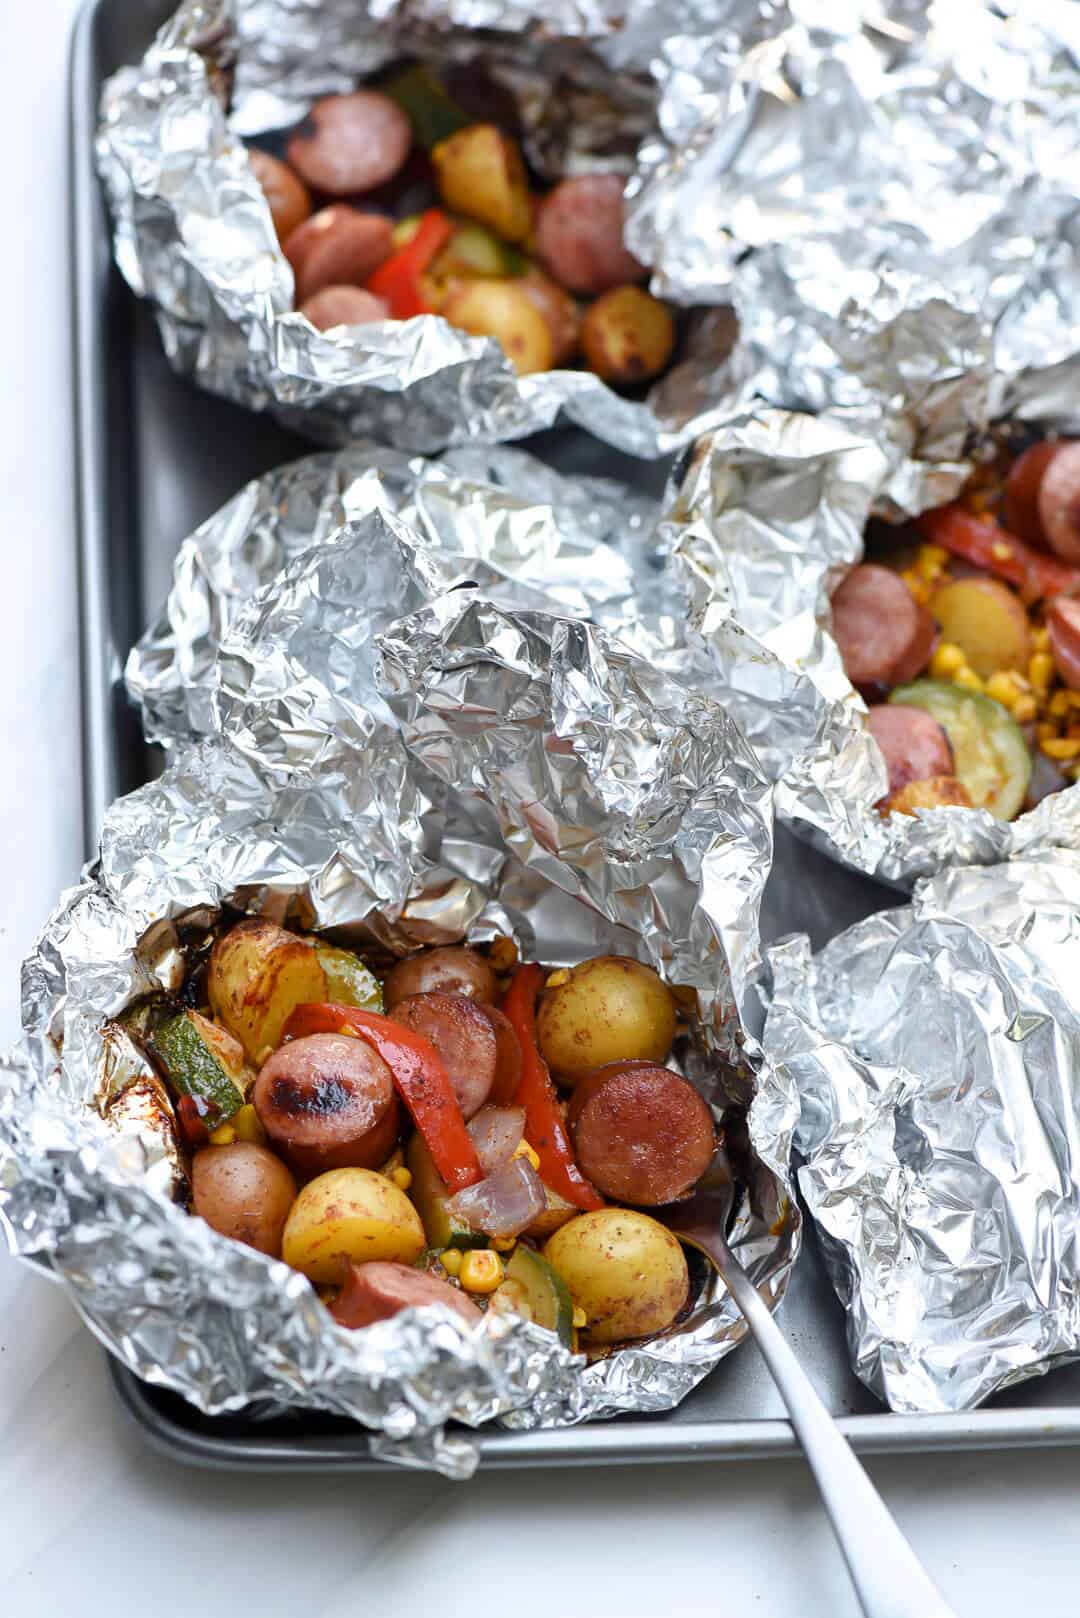 You just can't beat the foil pack method of cooking for an easy, stress-free summer meal. This Foil Pack Southwest Sausage and Potatoes takes just minutes to assemble, 15 minutes to cook, and cleanup is almost non-existent!